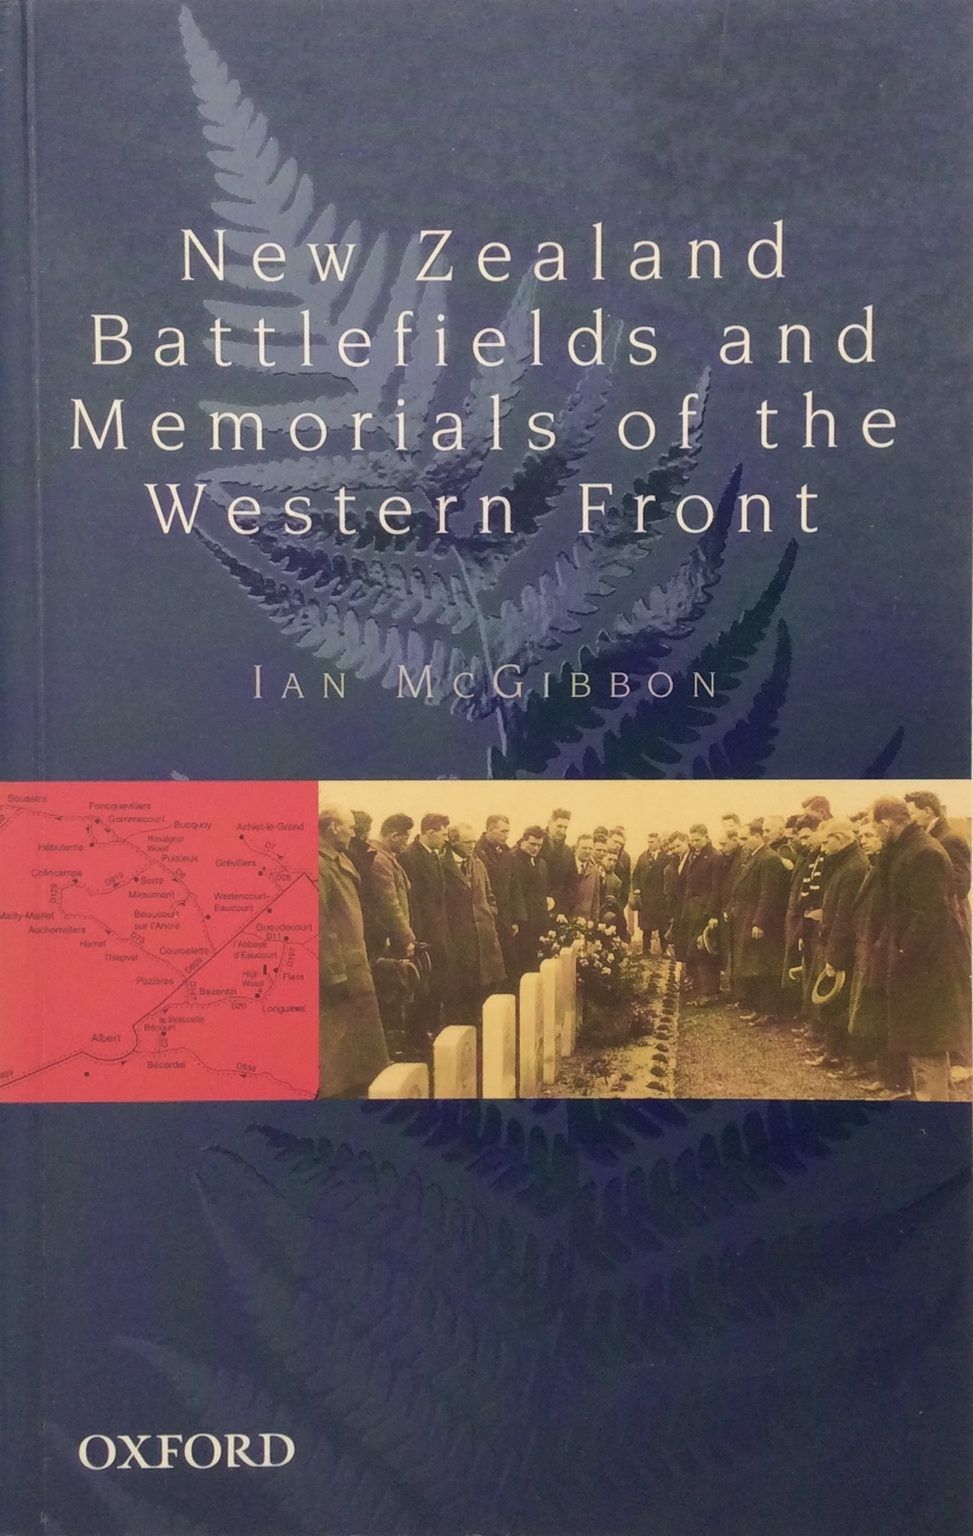 New Zealand Battlefields and Memorials of the Western Front